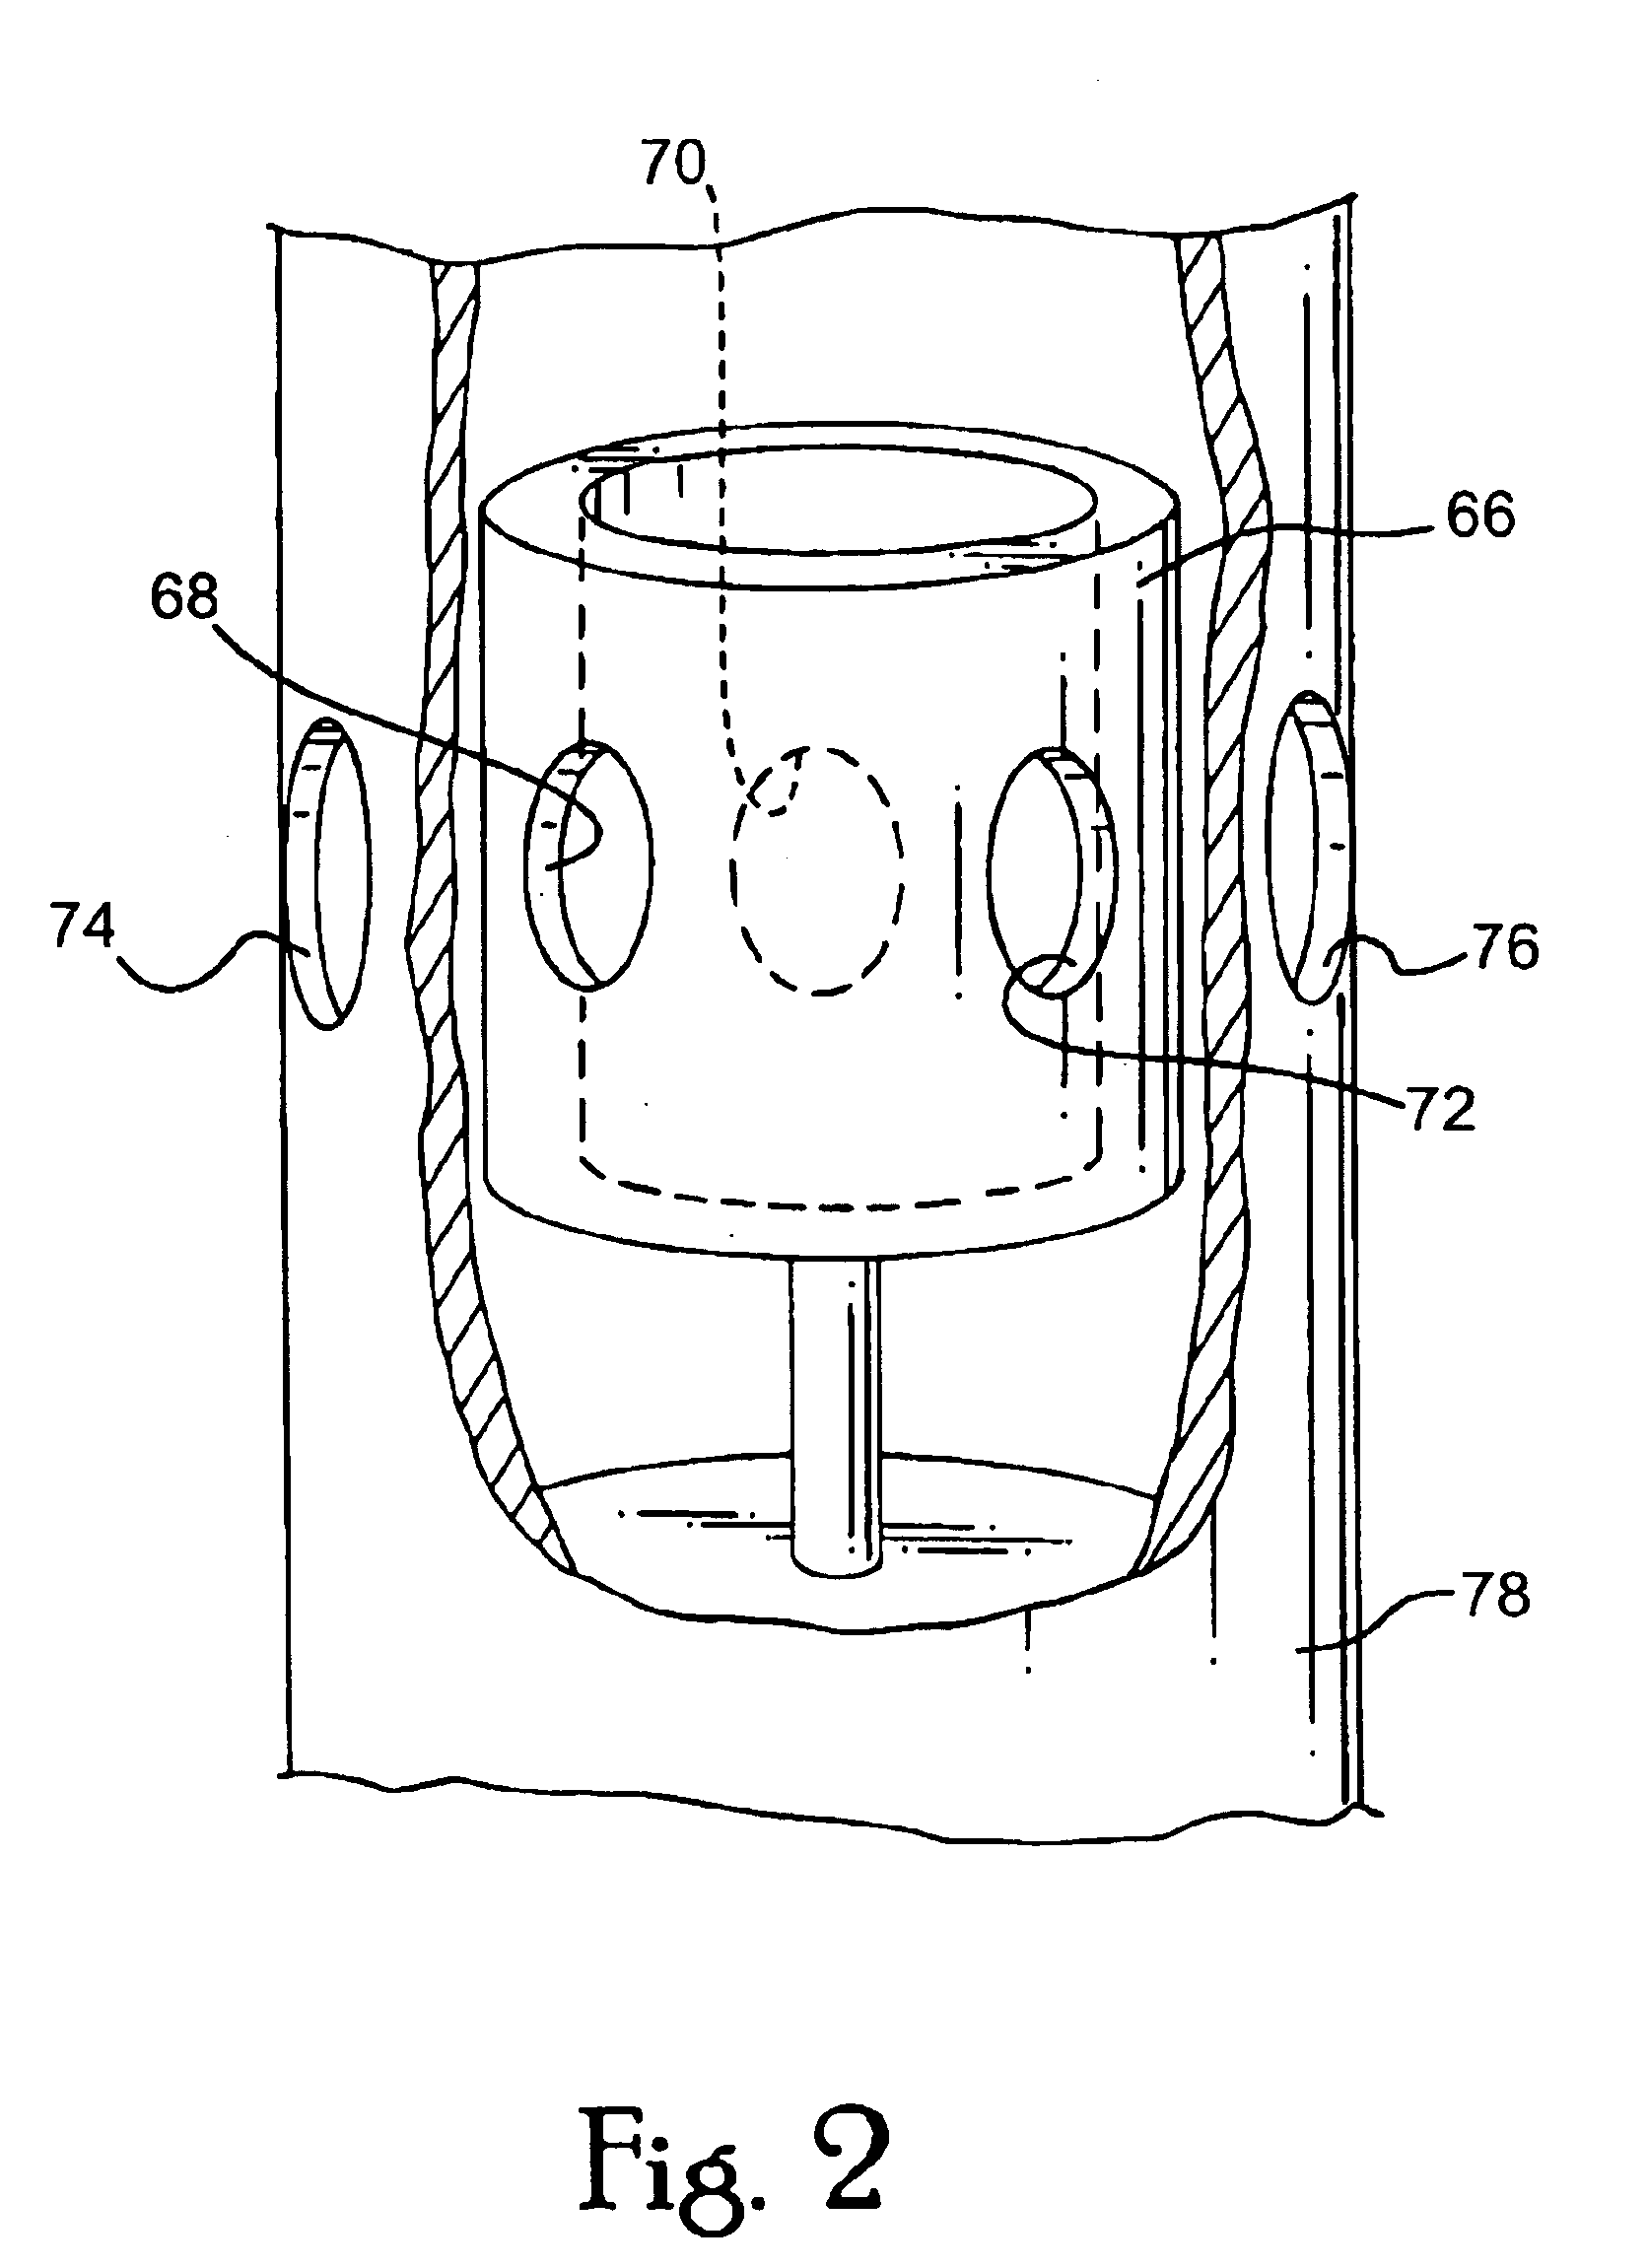 Apparatus and method for providing high frequency variable pressure to a patient